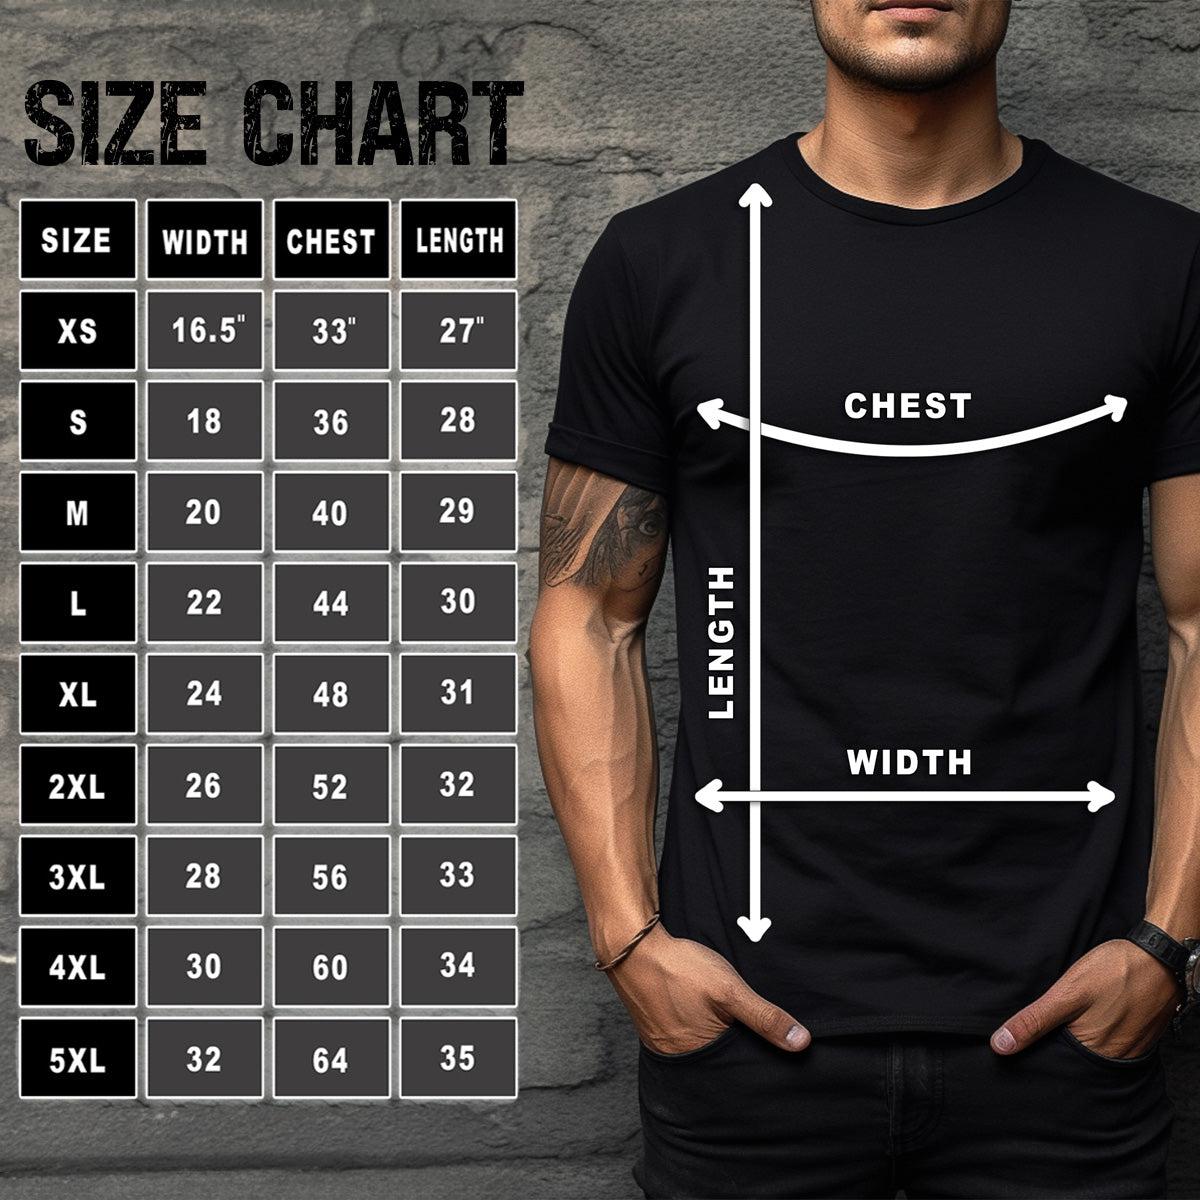 Men's Pink T Shirts Premium Casual Short Sleeve Classic Fit Crew Neck Shirts